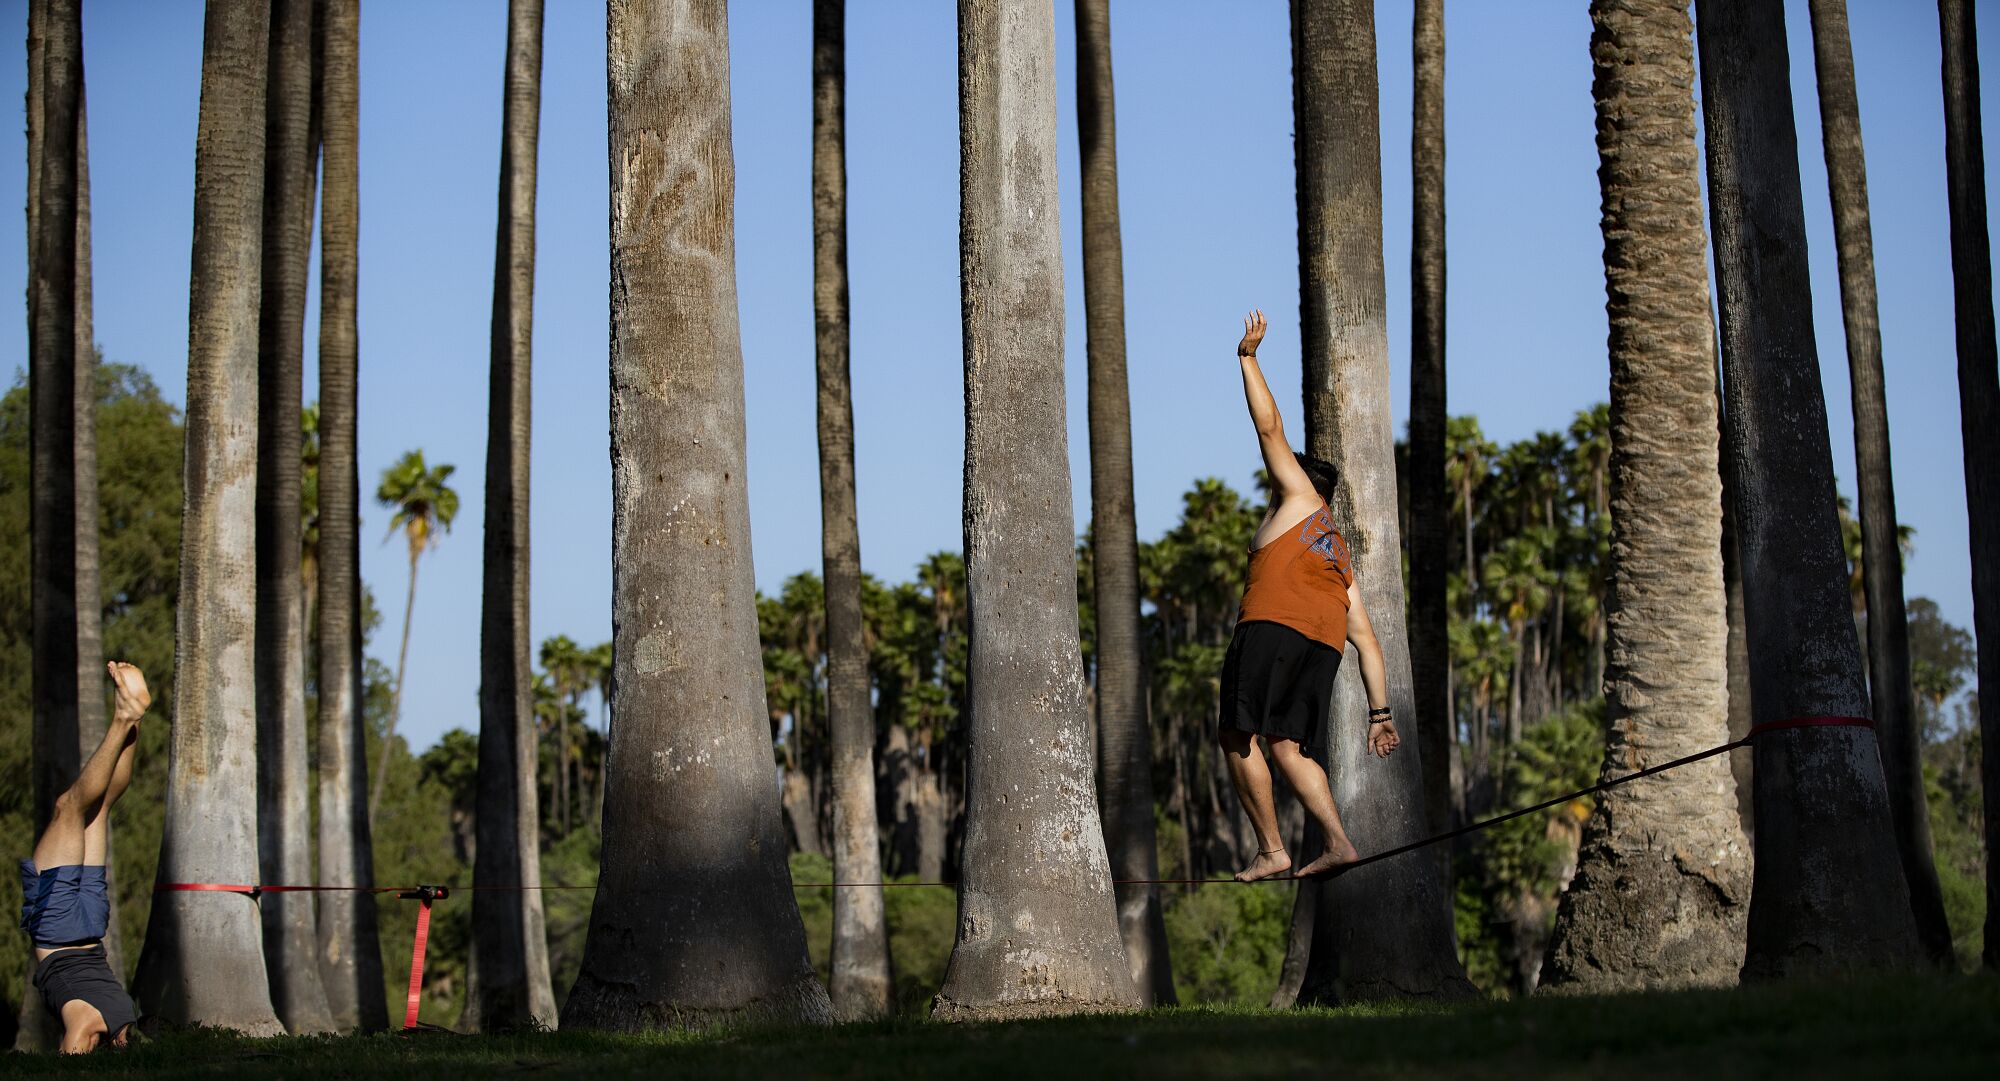 Jesus Duenas of Riverside practices his slack lining while his brother Alfred Duenas, left, does strength exercises amongst the seclusion of palm trees in Fairmount Park during the coronavirus pandemic n Riverside.